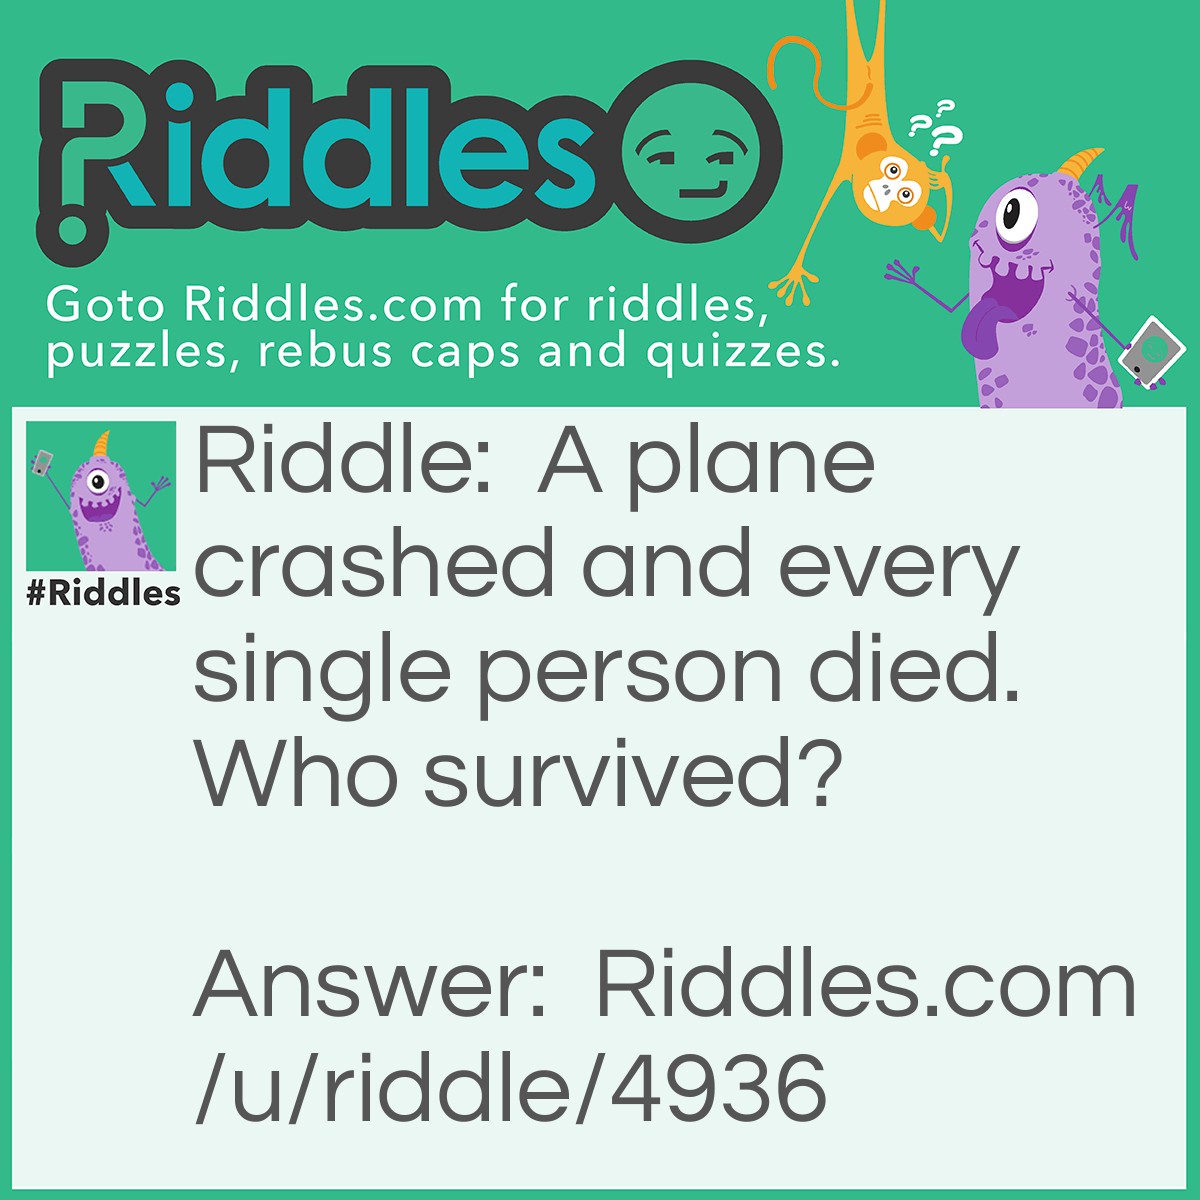 Riddle: A plane crashed and every single person died. Who survived? Answer: The married couples!